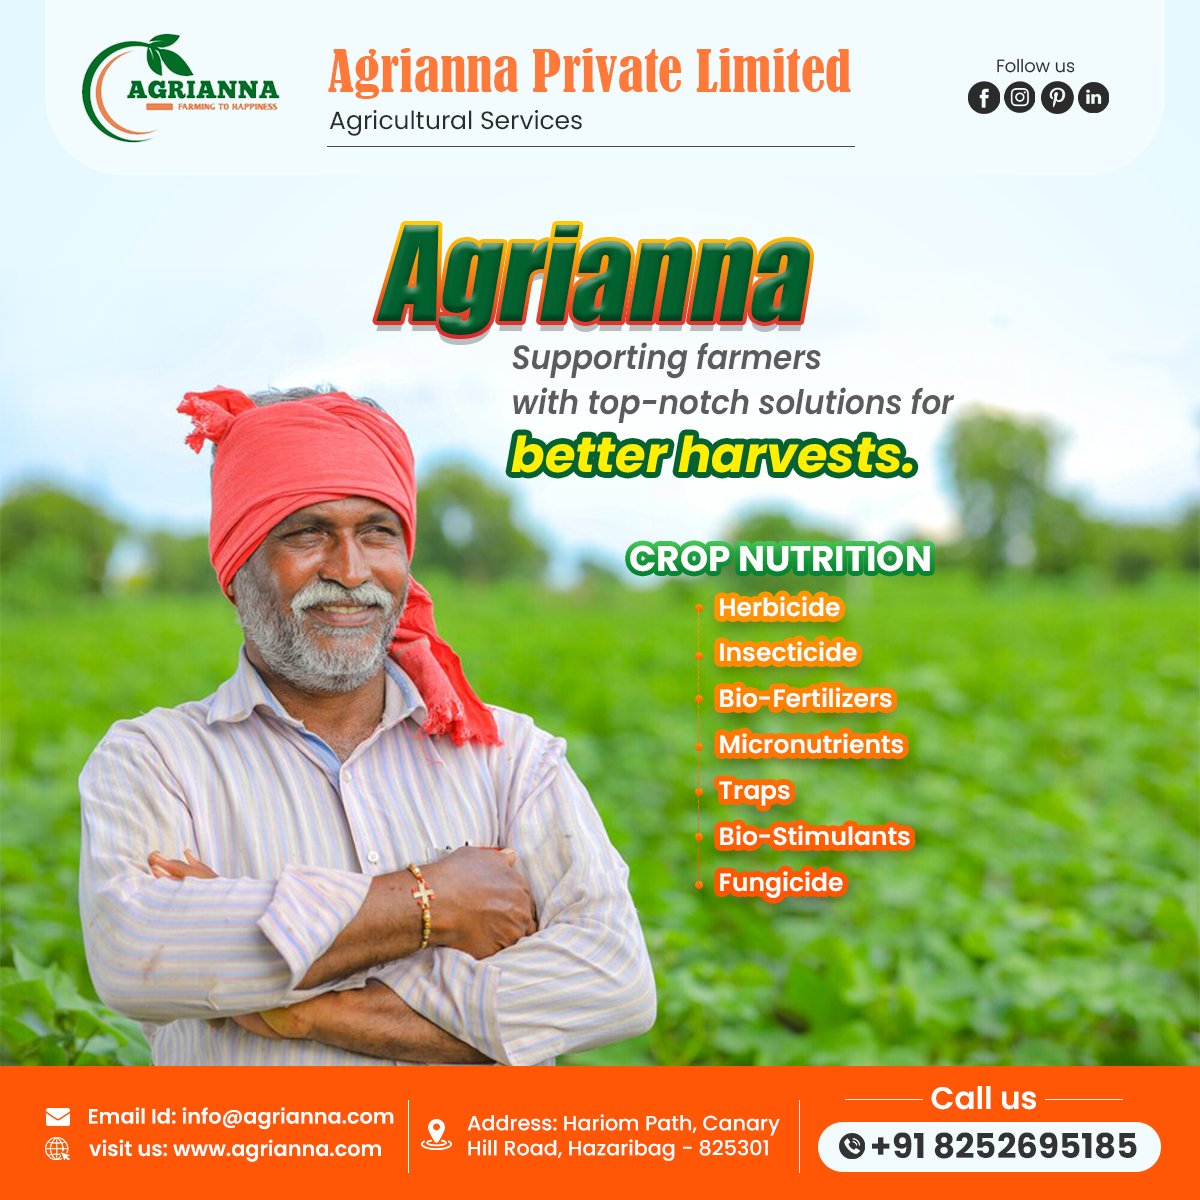 Supporting farmers with top-notch solutions for better harvests. 🌱🚜
Reach us -
Address-Hariom Path, Canary Hill Road, Hazaribag - 825301
Email id- agriannaprivatelimited@gmail.com.
#agrianna #cattlefeed #feed #agricultutre #agriproducts #productivity #greenfuture